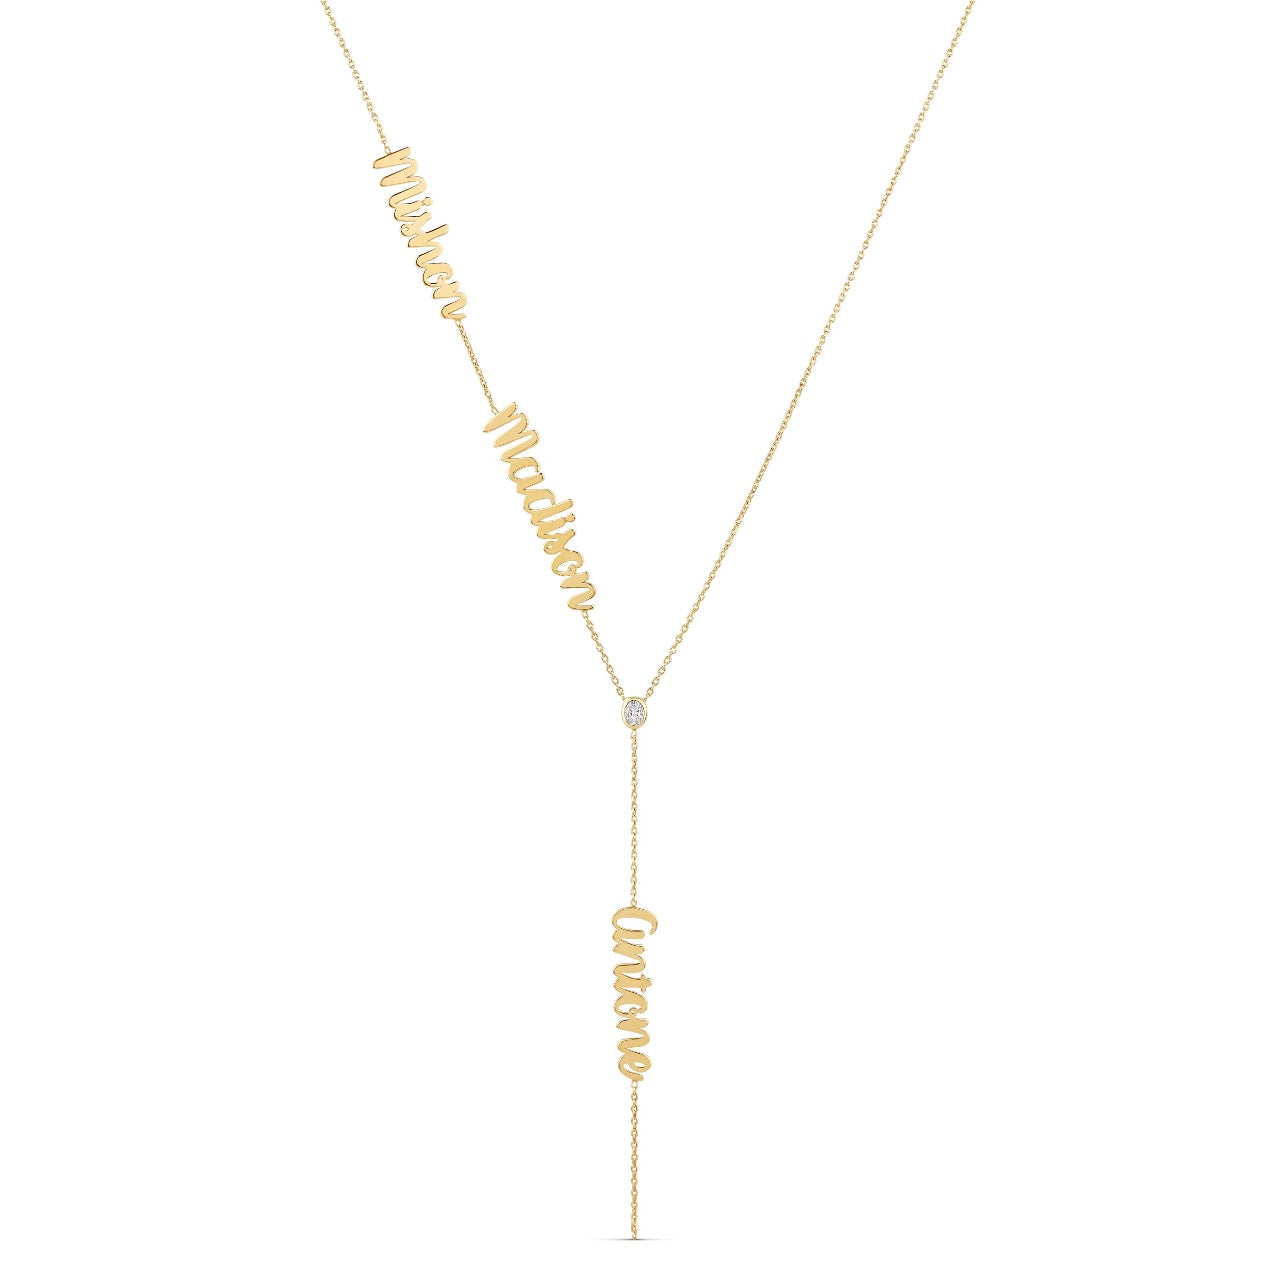 Multiple Names Lariat Necklace with Drop Charm